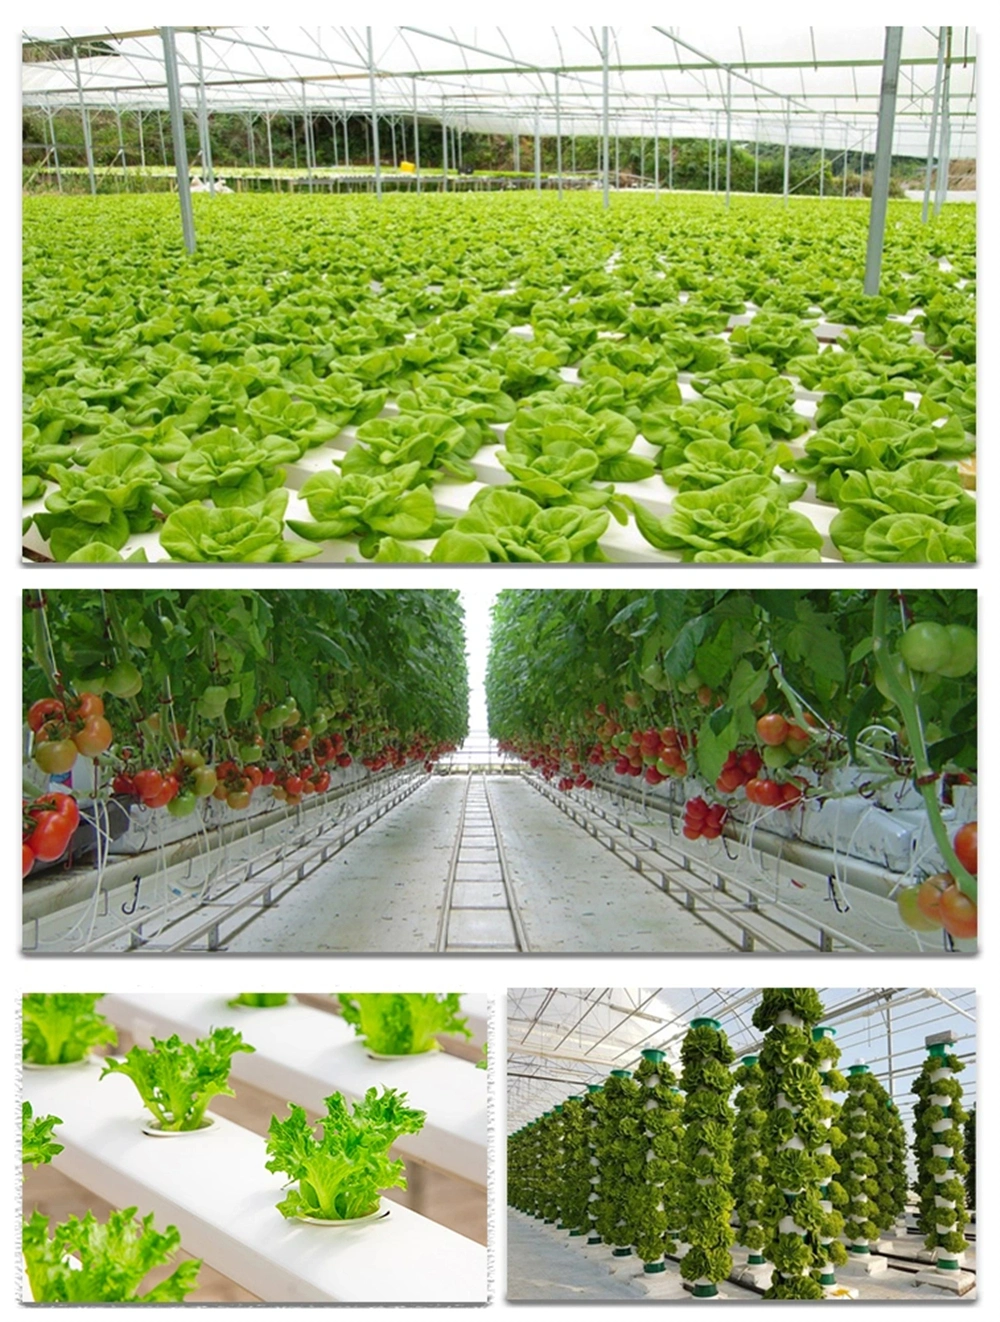 Arch Type Plastic Film Agriculture Productive/Vertical/Hydroponic Greenhouse for Tomatoes/Fruits/Cabbage/Cauliflower/Cassava/Garden